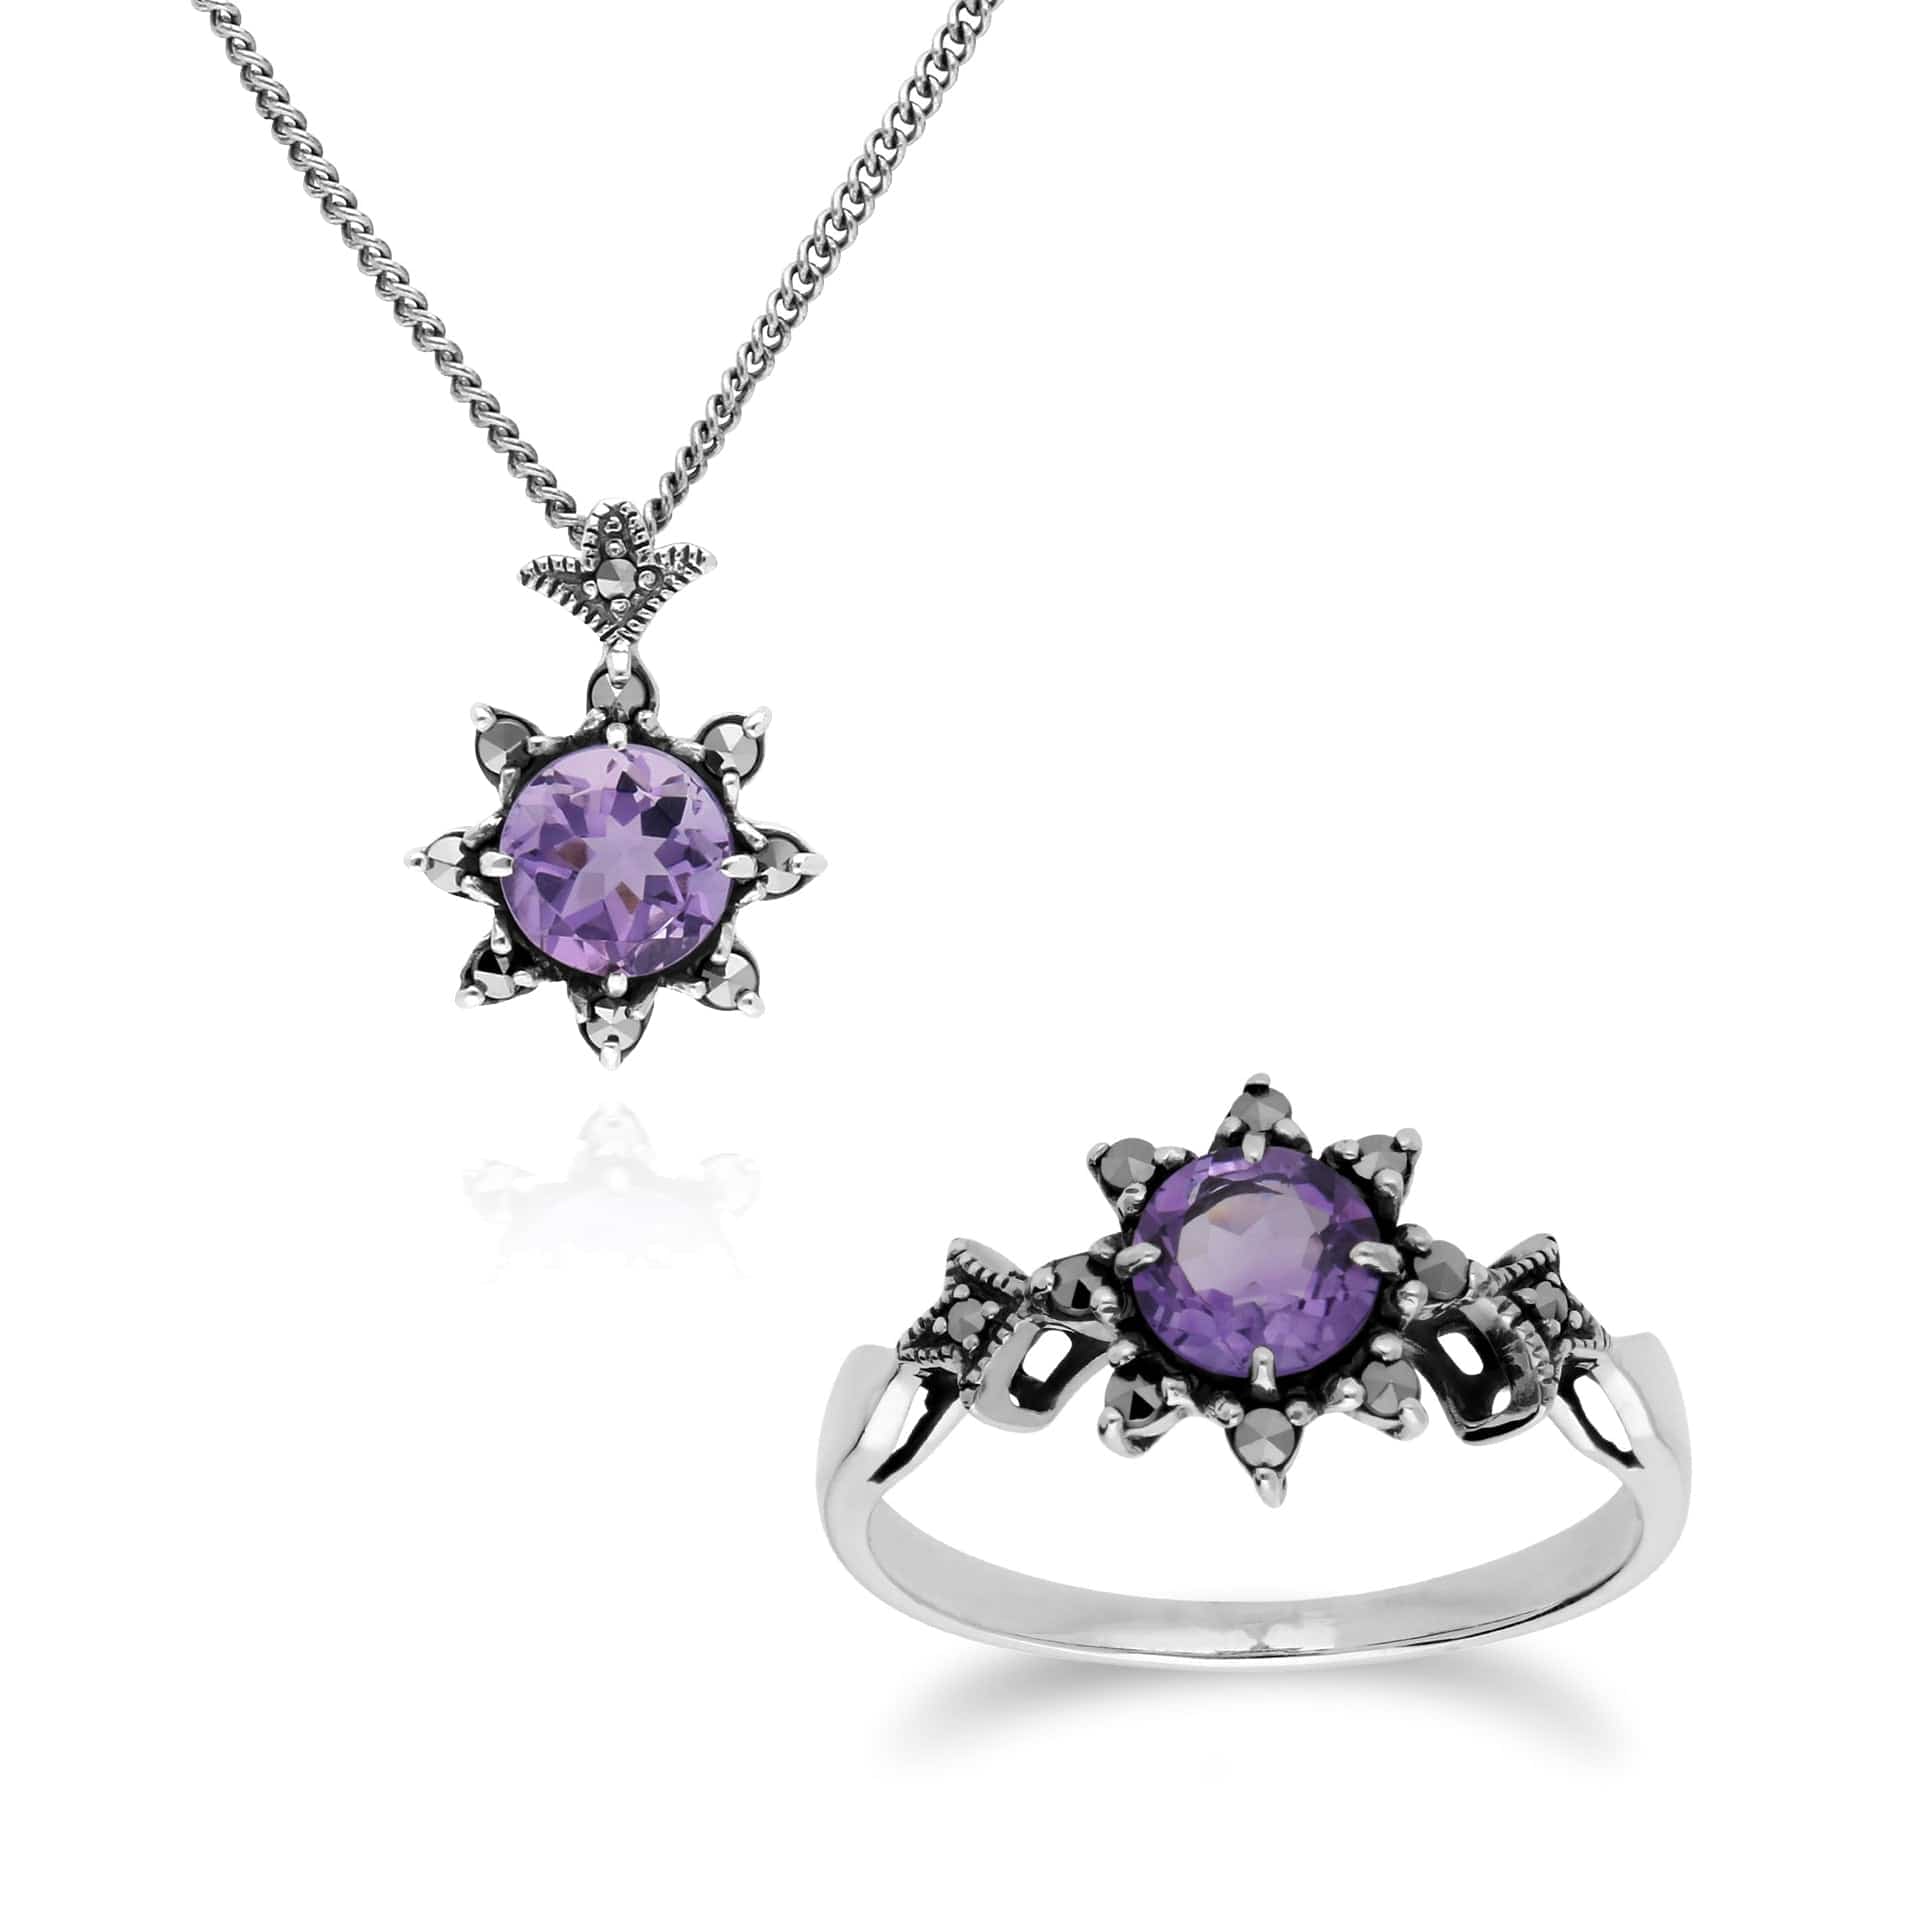 214N696002925-214R599502925 Art Nouveau Style Style Round Amethyst & Marcasite Starburst Pendant & Ring Set in 925 Sterling Silver 1